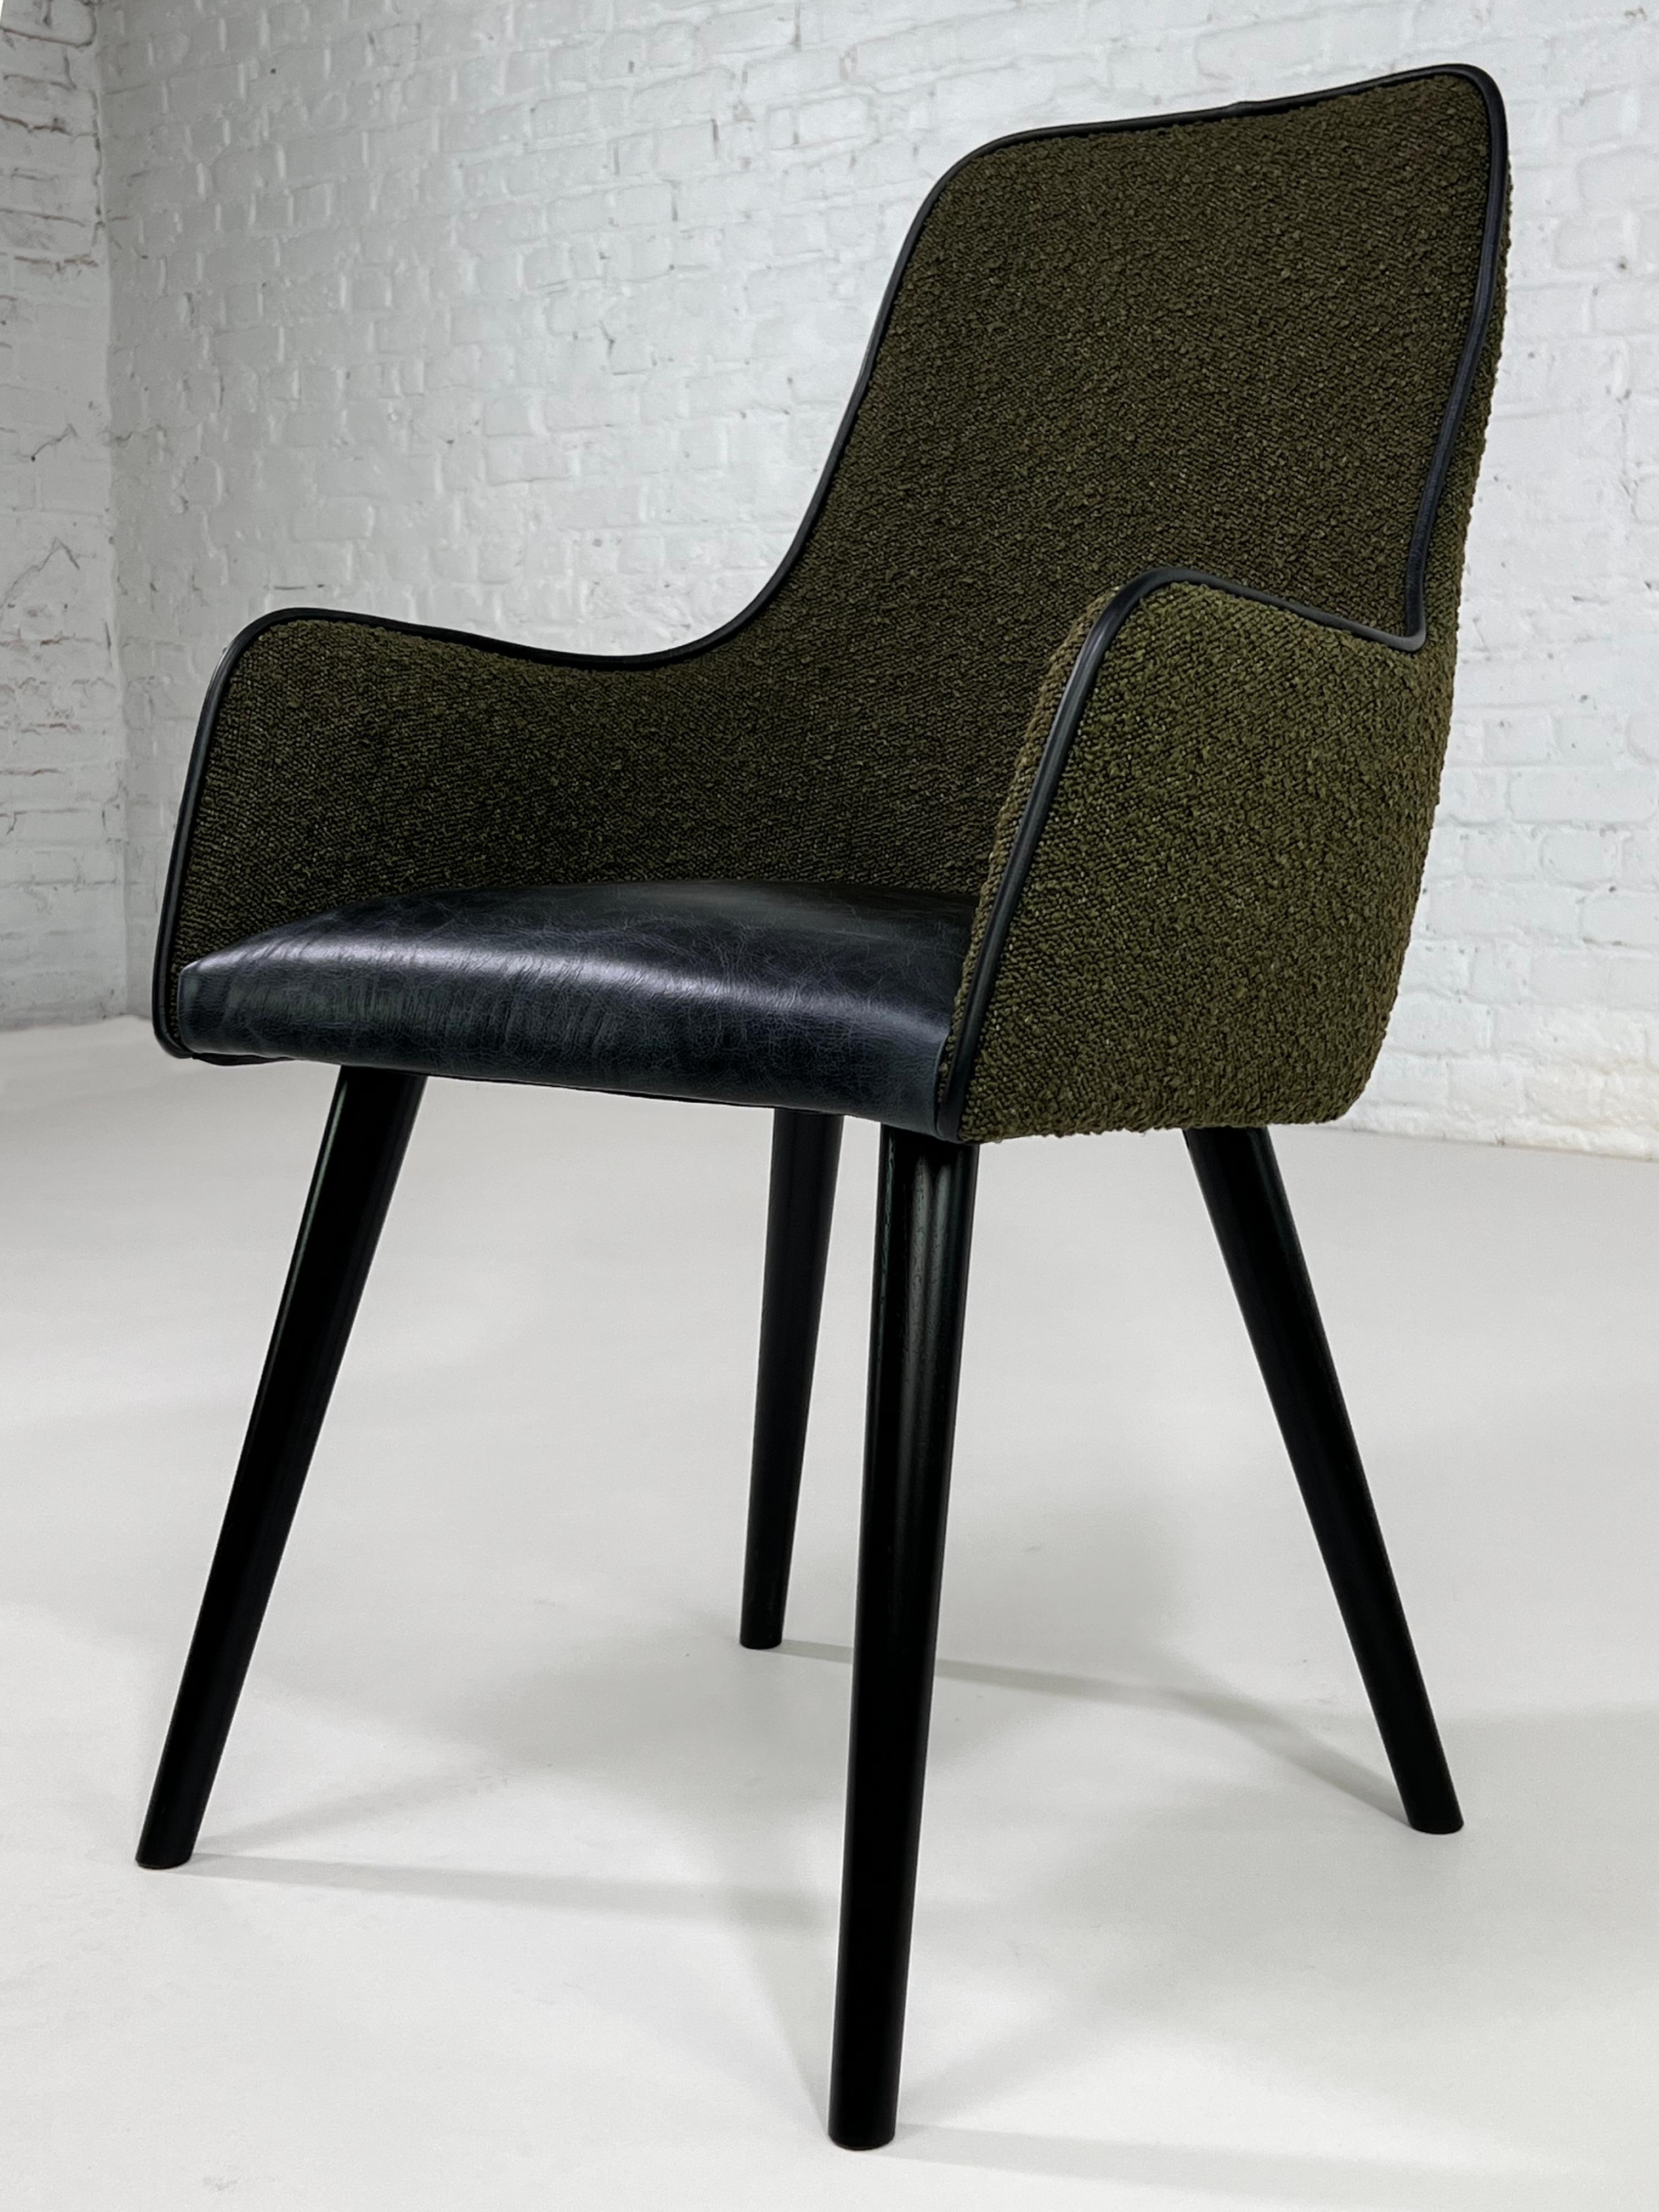 1950s - 1960s MCM Design Scandinavian Style Dark Green Bouclé Fabric With Patina Black Leather Finishes Chair composed of a black lacquered wooden feet and a comfy seat in a black leather seat with dark green bouclé fabric back.